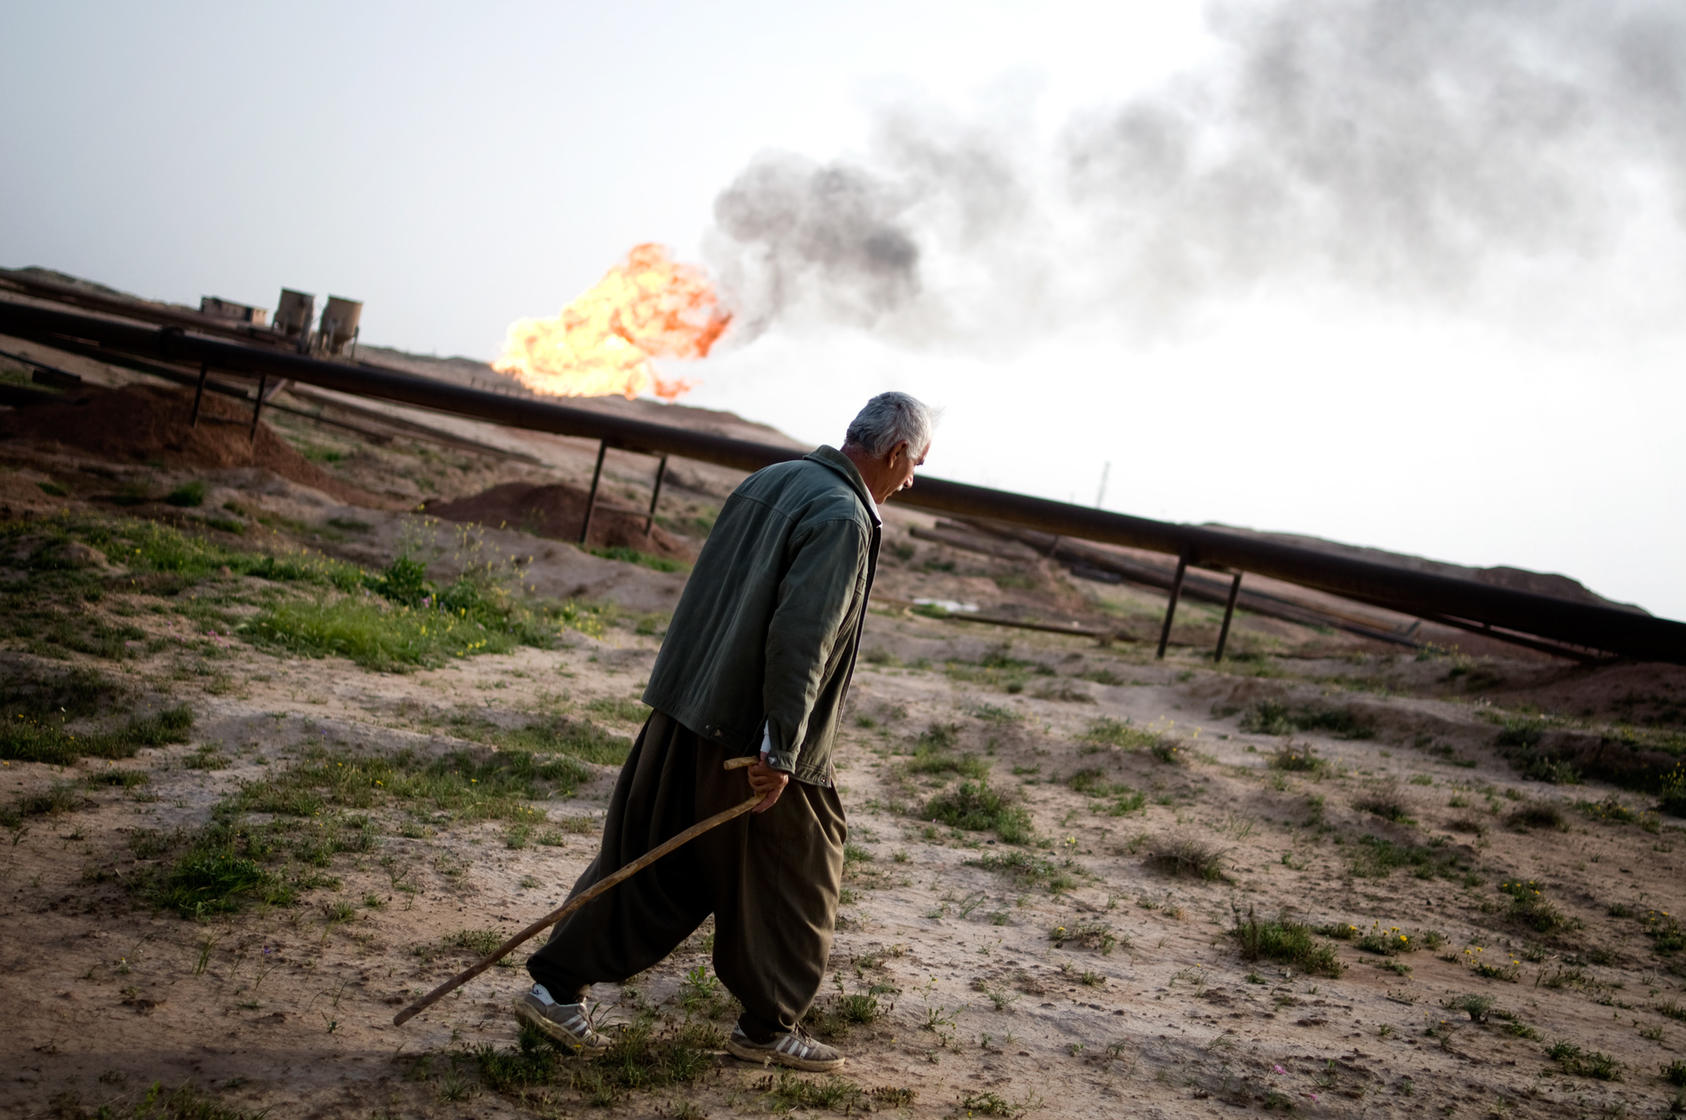 A Kurdish shepherd passes a flare from an oil well in Kirkuk, Iraq, March 12, 2010. Iraqi Kurds are selling oil and natural gas directly to Turkey, infuriating Washington and the central government in Baghdad, which fear that oil independence could lead Kurds to declare a broad independence and the fracturing of the nation. (Ayman Oghanna/The New York Times)